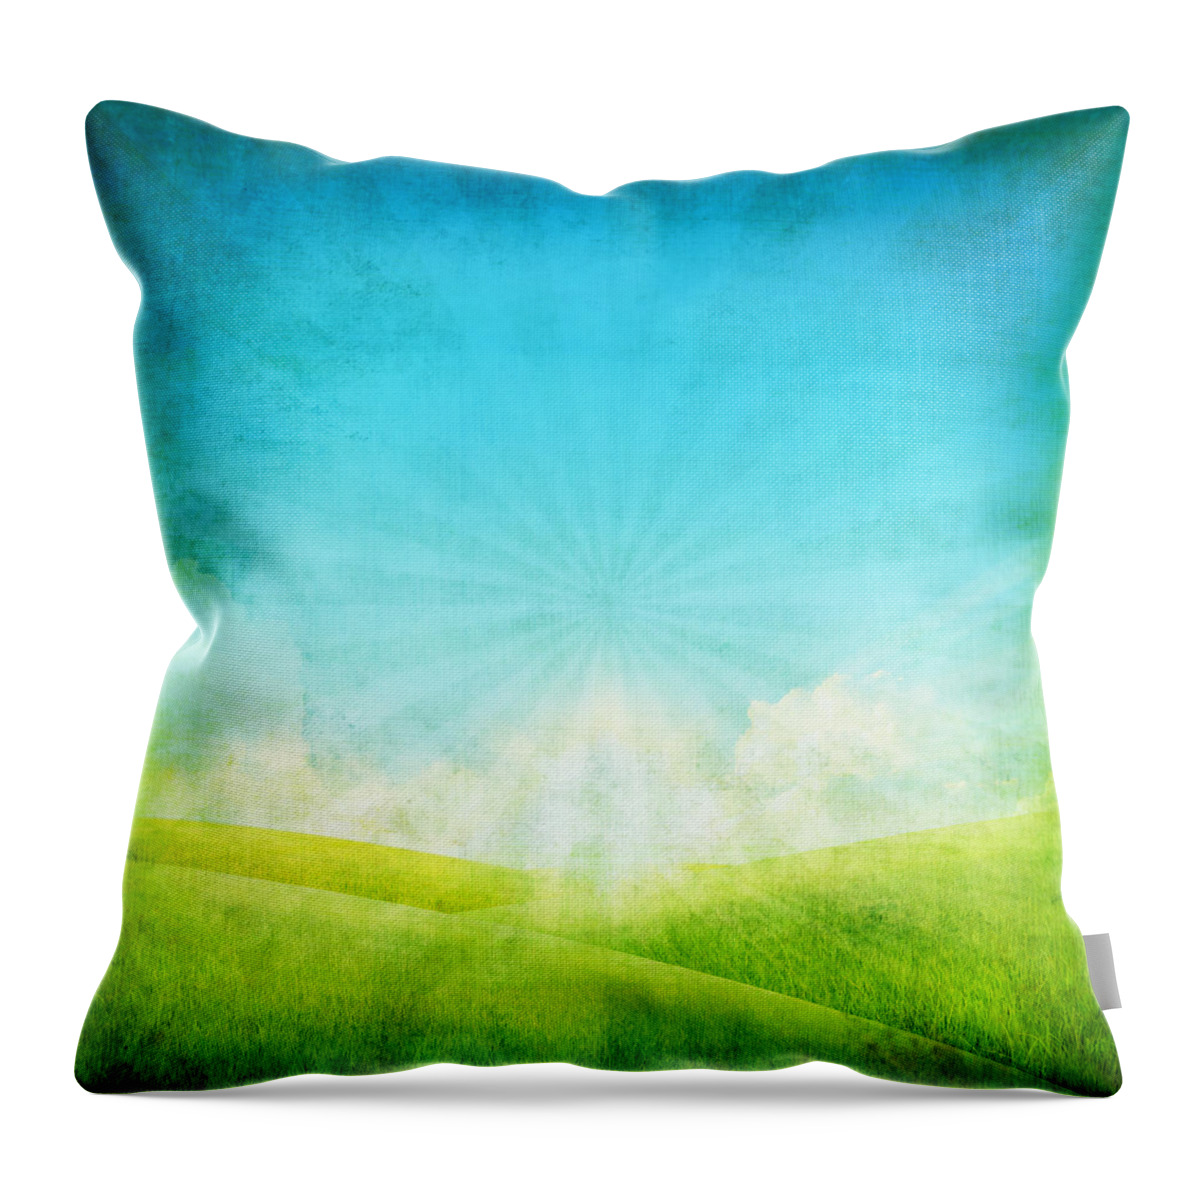 Abstract Throw Pillow featuring the painting Old Grunge Paper by Setsiri Silapasuwanchai